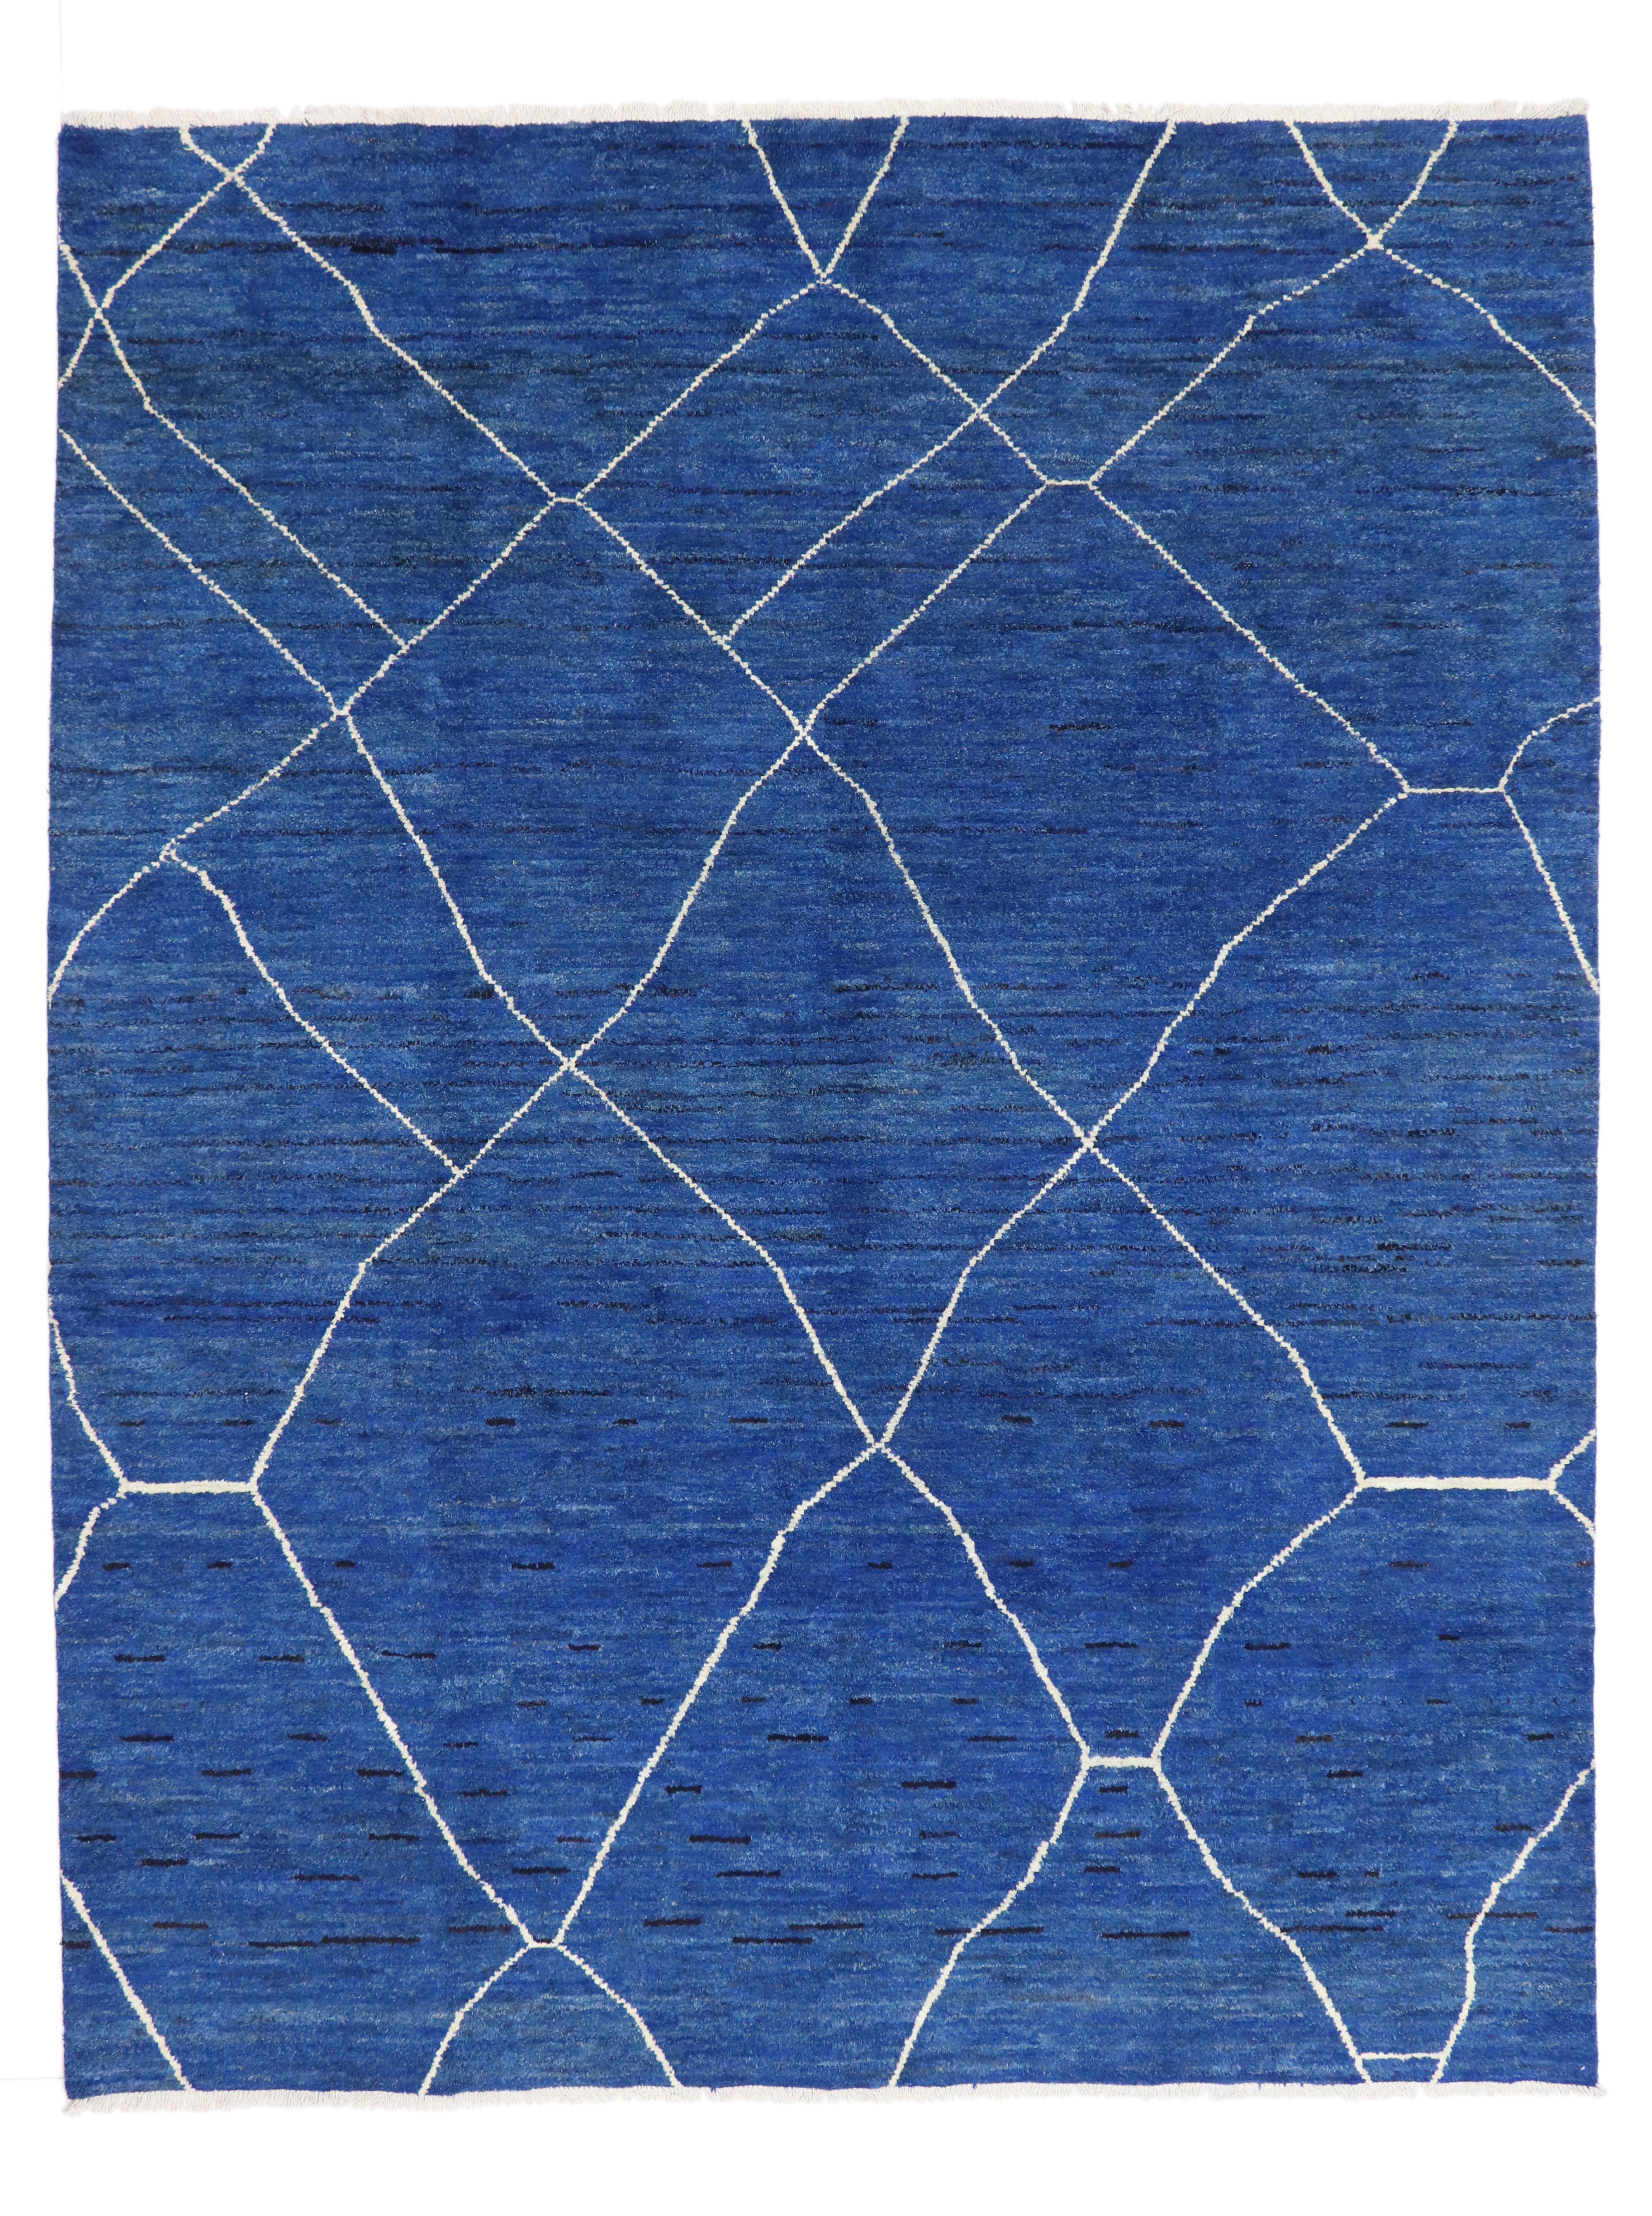 80290 New Contemporary Blue Moroccan Style Rug with Abstract Expressionist Style 10'04 x 13'03. This hand knotted wool contemporary Moroccan area rug with Abstract Expressionist style features an all-over diamond lattice pattern spread across an